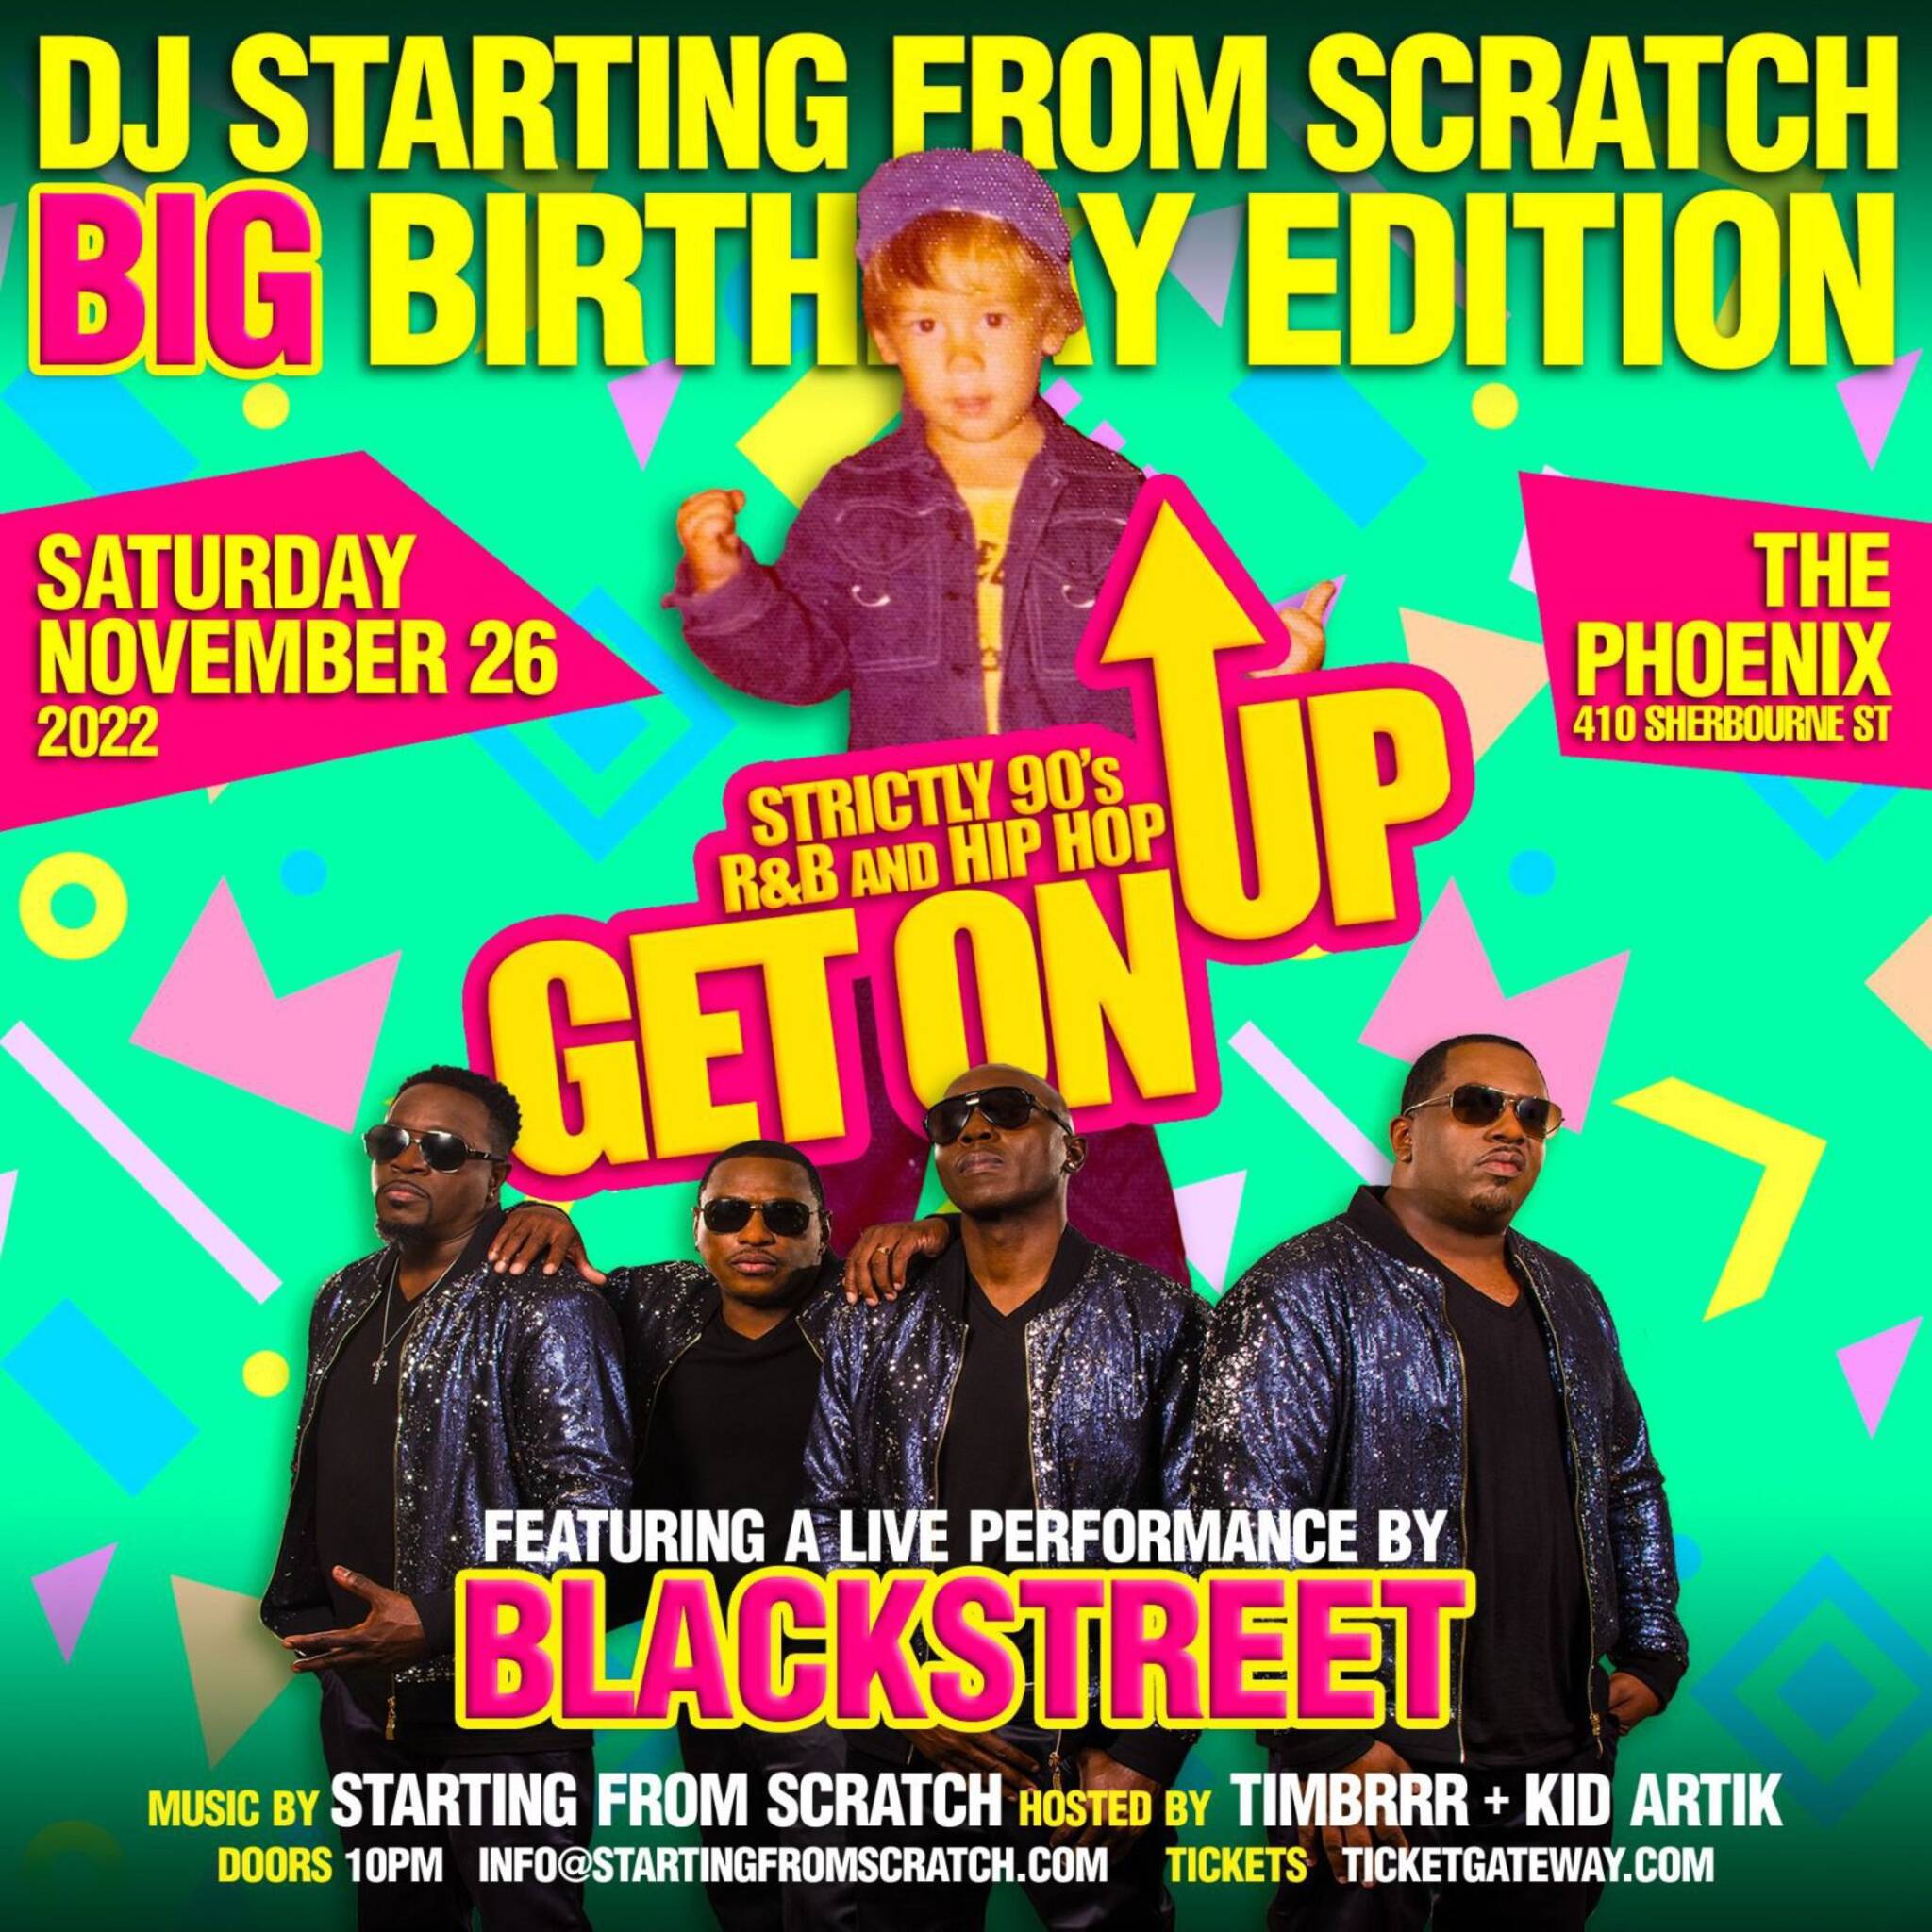 GET ON UP STRICTLY 90S R&B AND HIP HOP